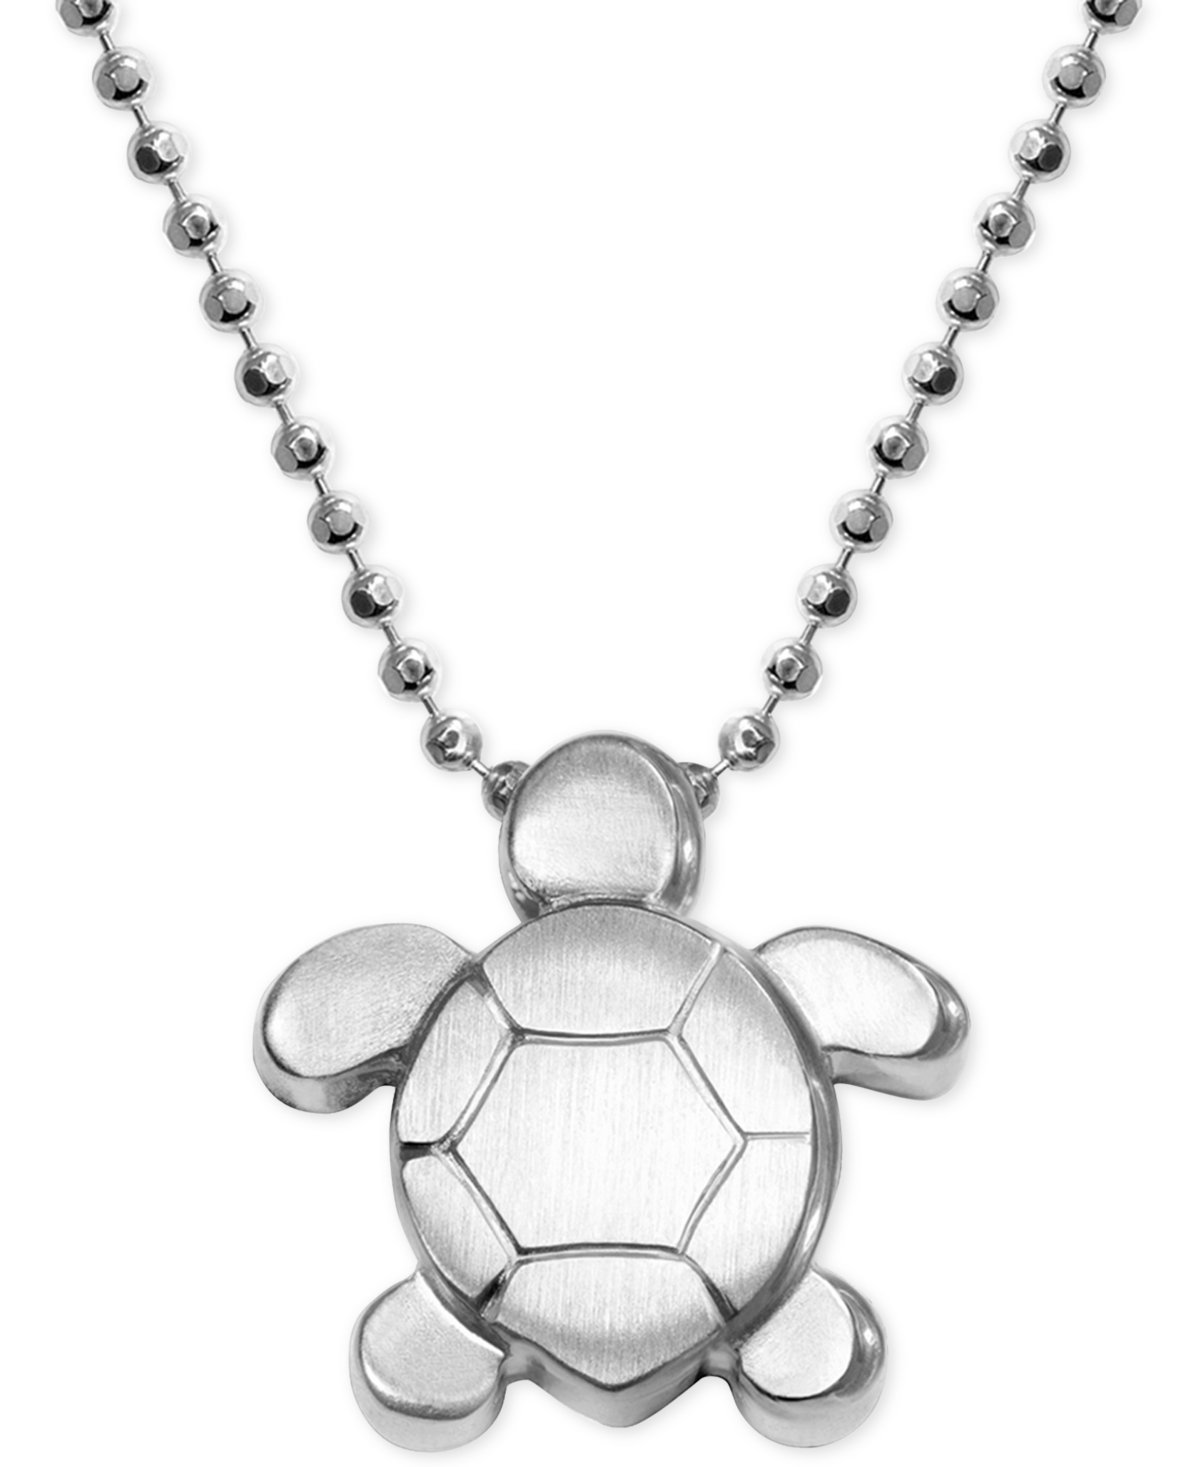 Alex Woo Turtle Pendant Necklace in Sterling Silver